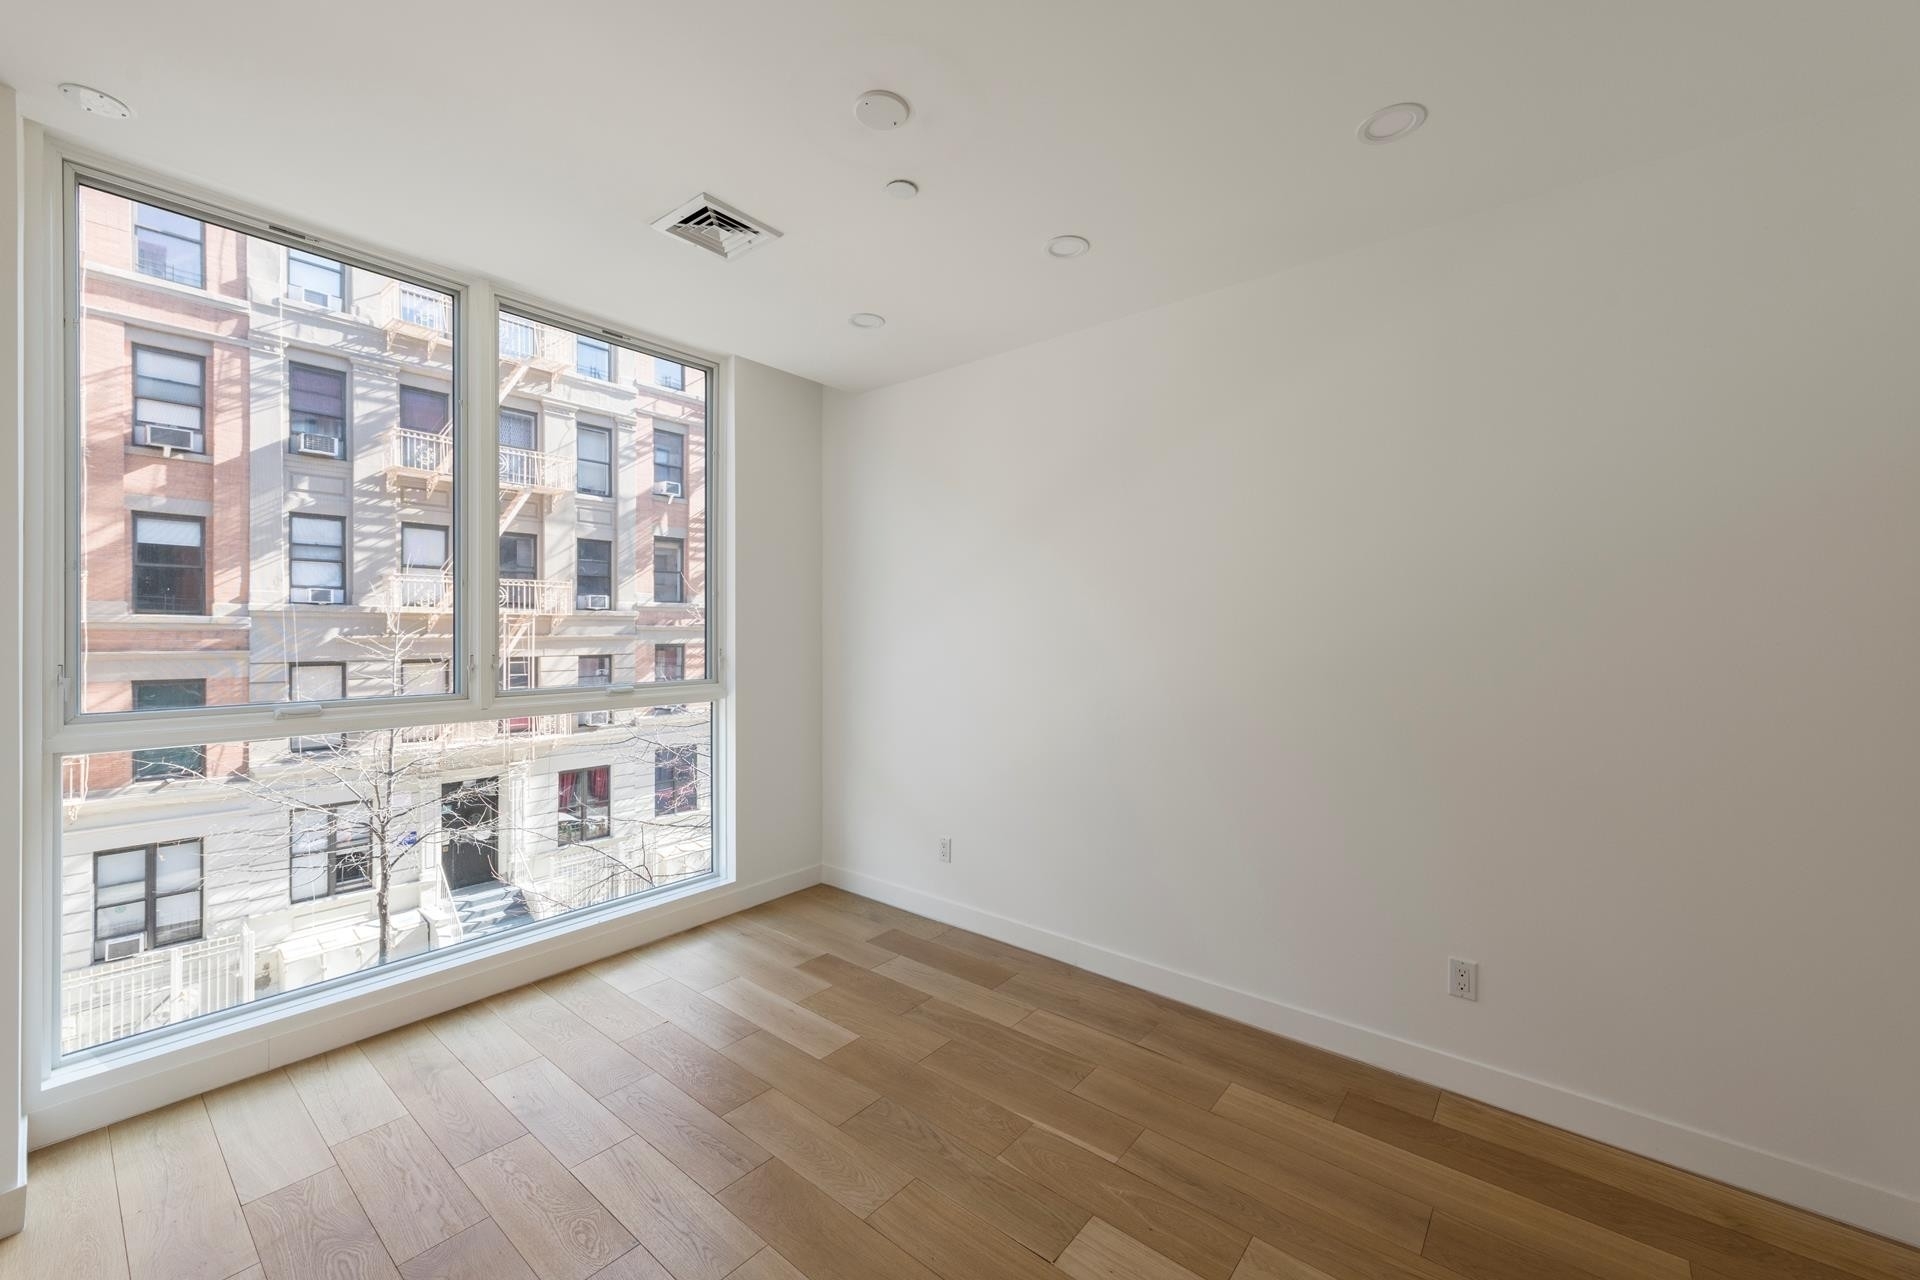 5. Condominiums for Sale at 310 W 114TH ST, 4 South Harlem, New York, New York 10026